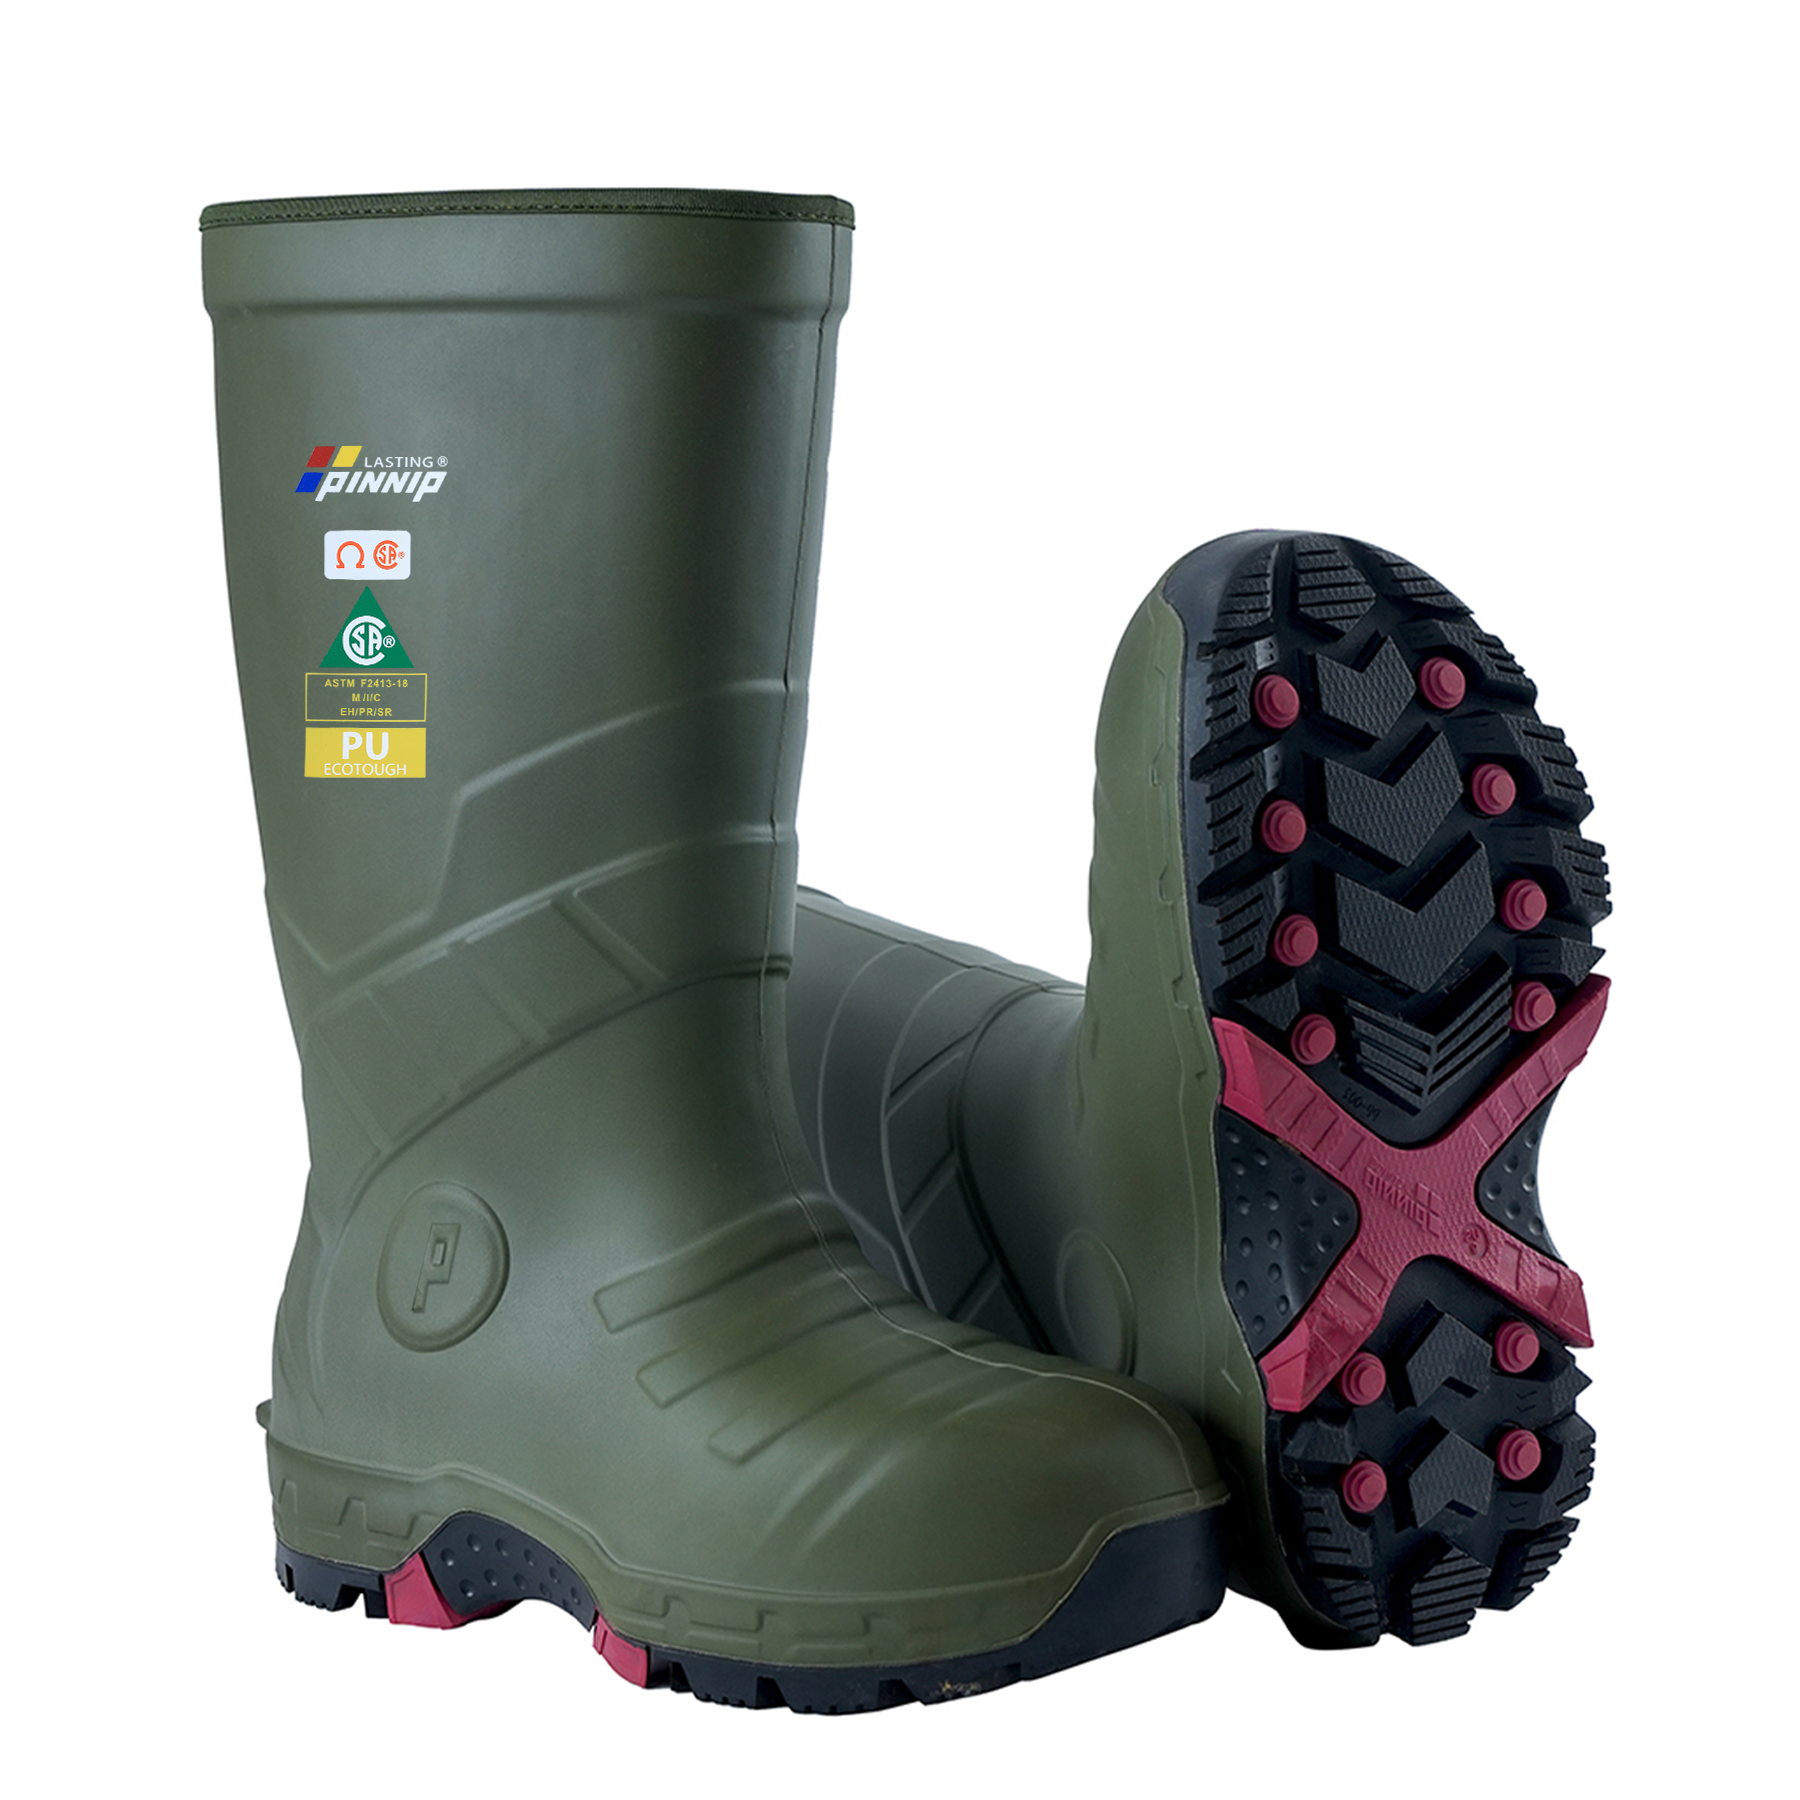 Snow Conquer Protective Boots For Winter - Green (CSA, ASTM)